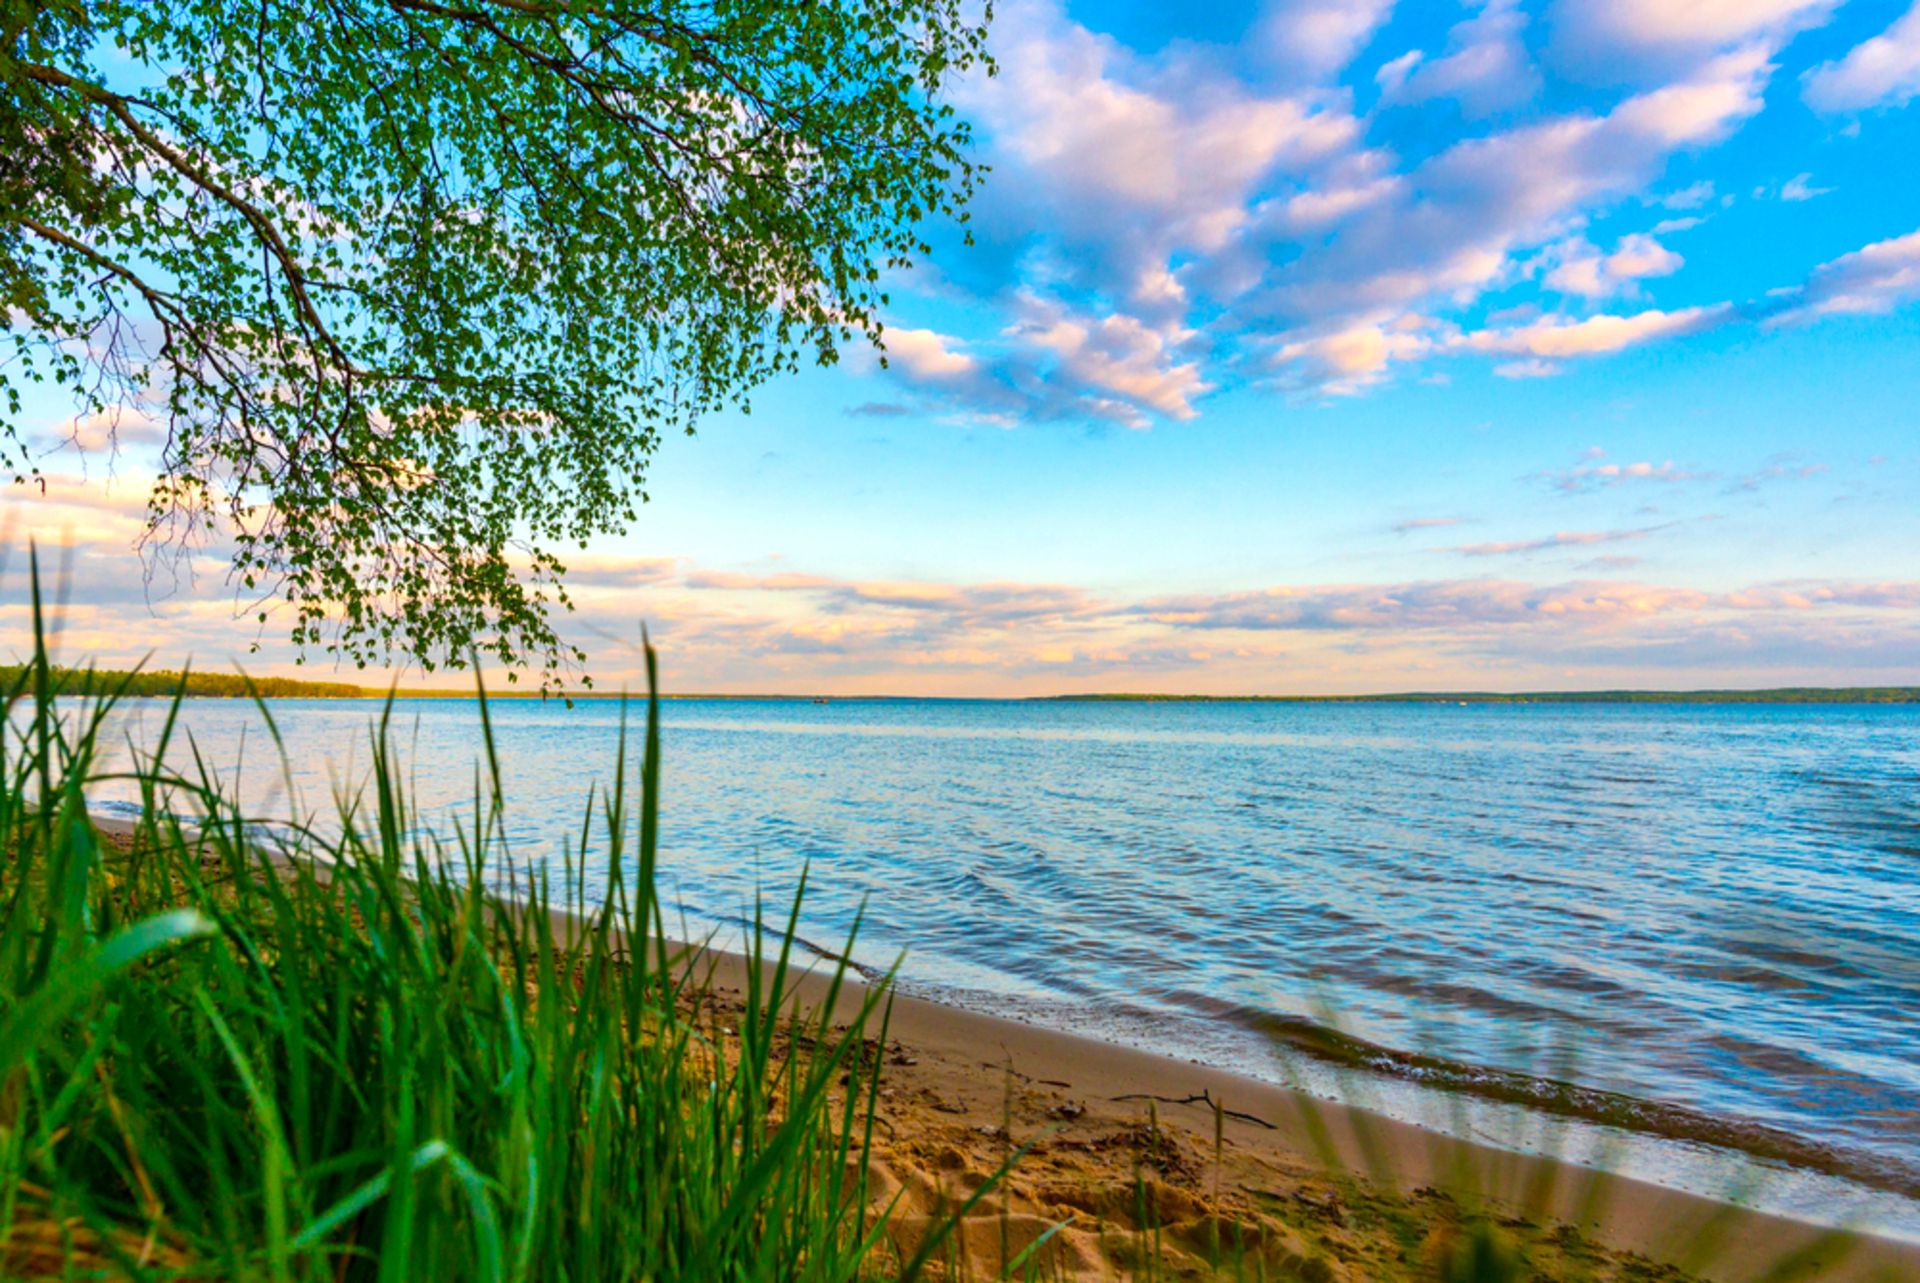 Steps Away from Lake Erie: Explore Monroe County, Michigan's Lakeside Charm! - Image 10 of 15